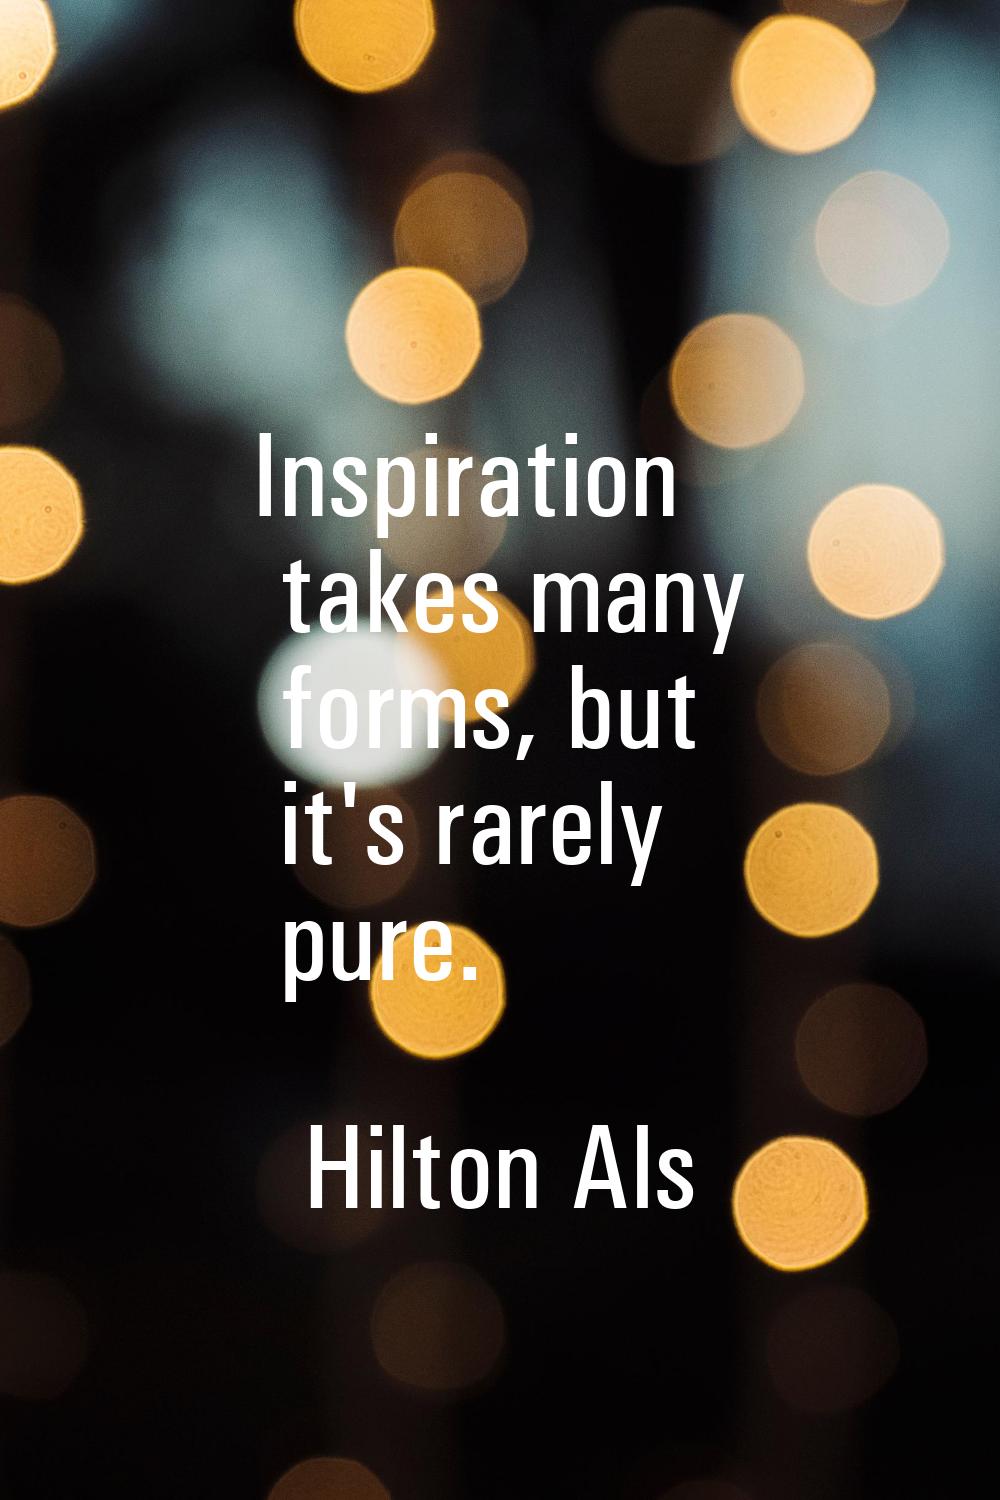 Inspiration takes many forms, but it's rarely pure.